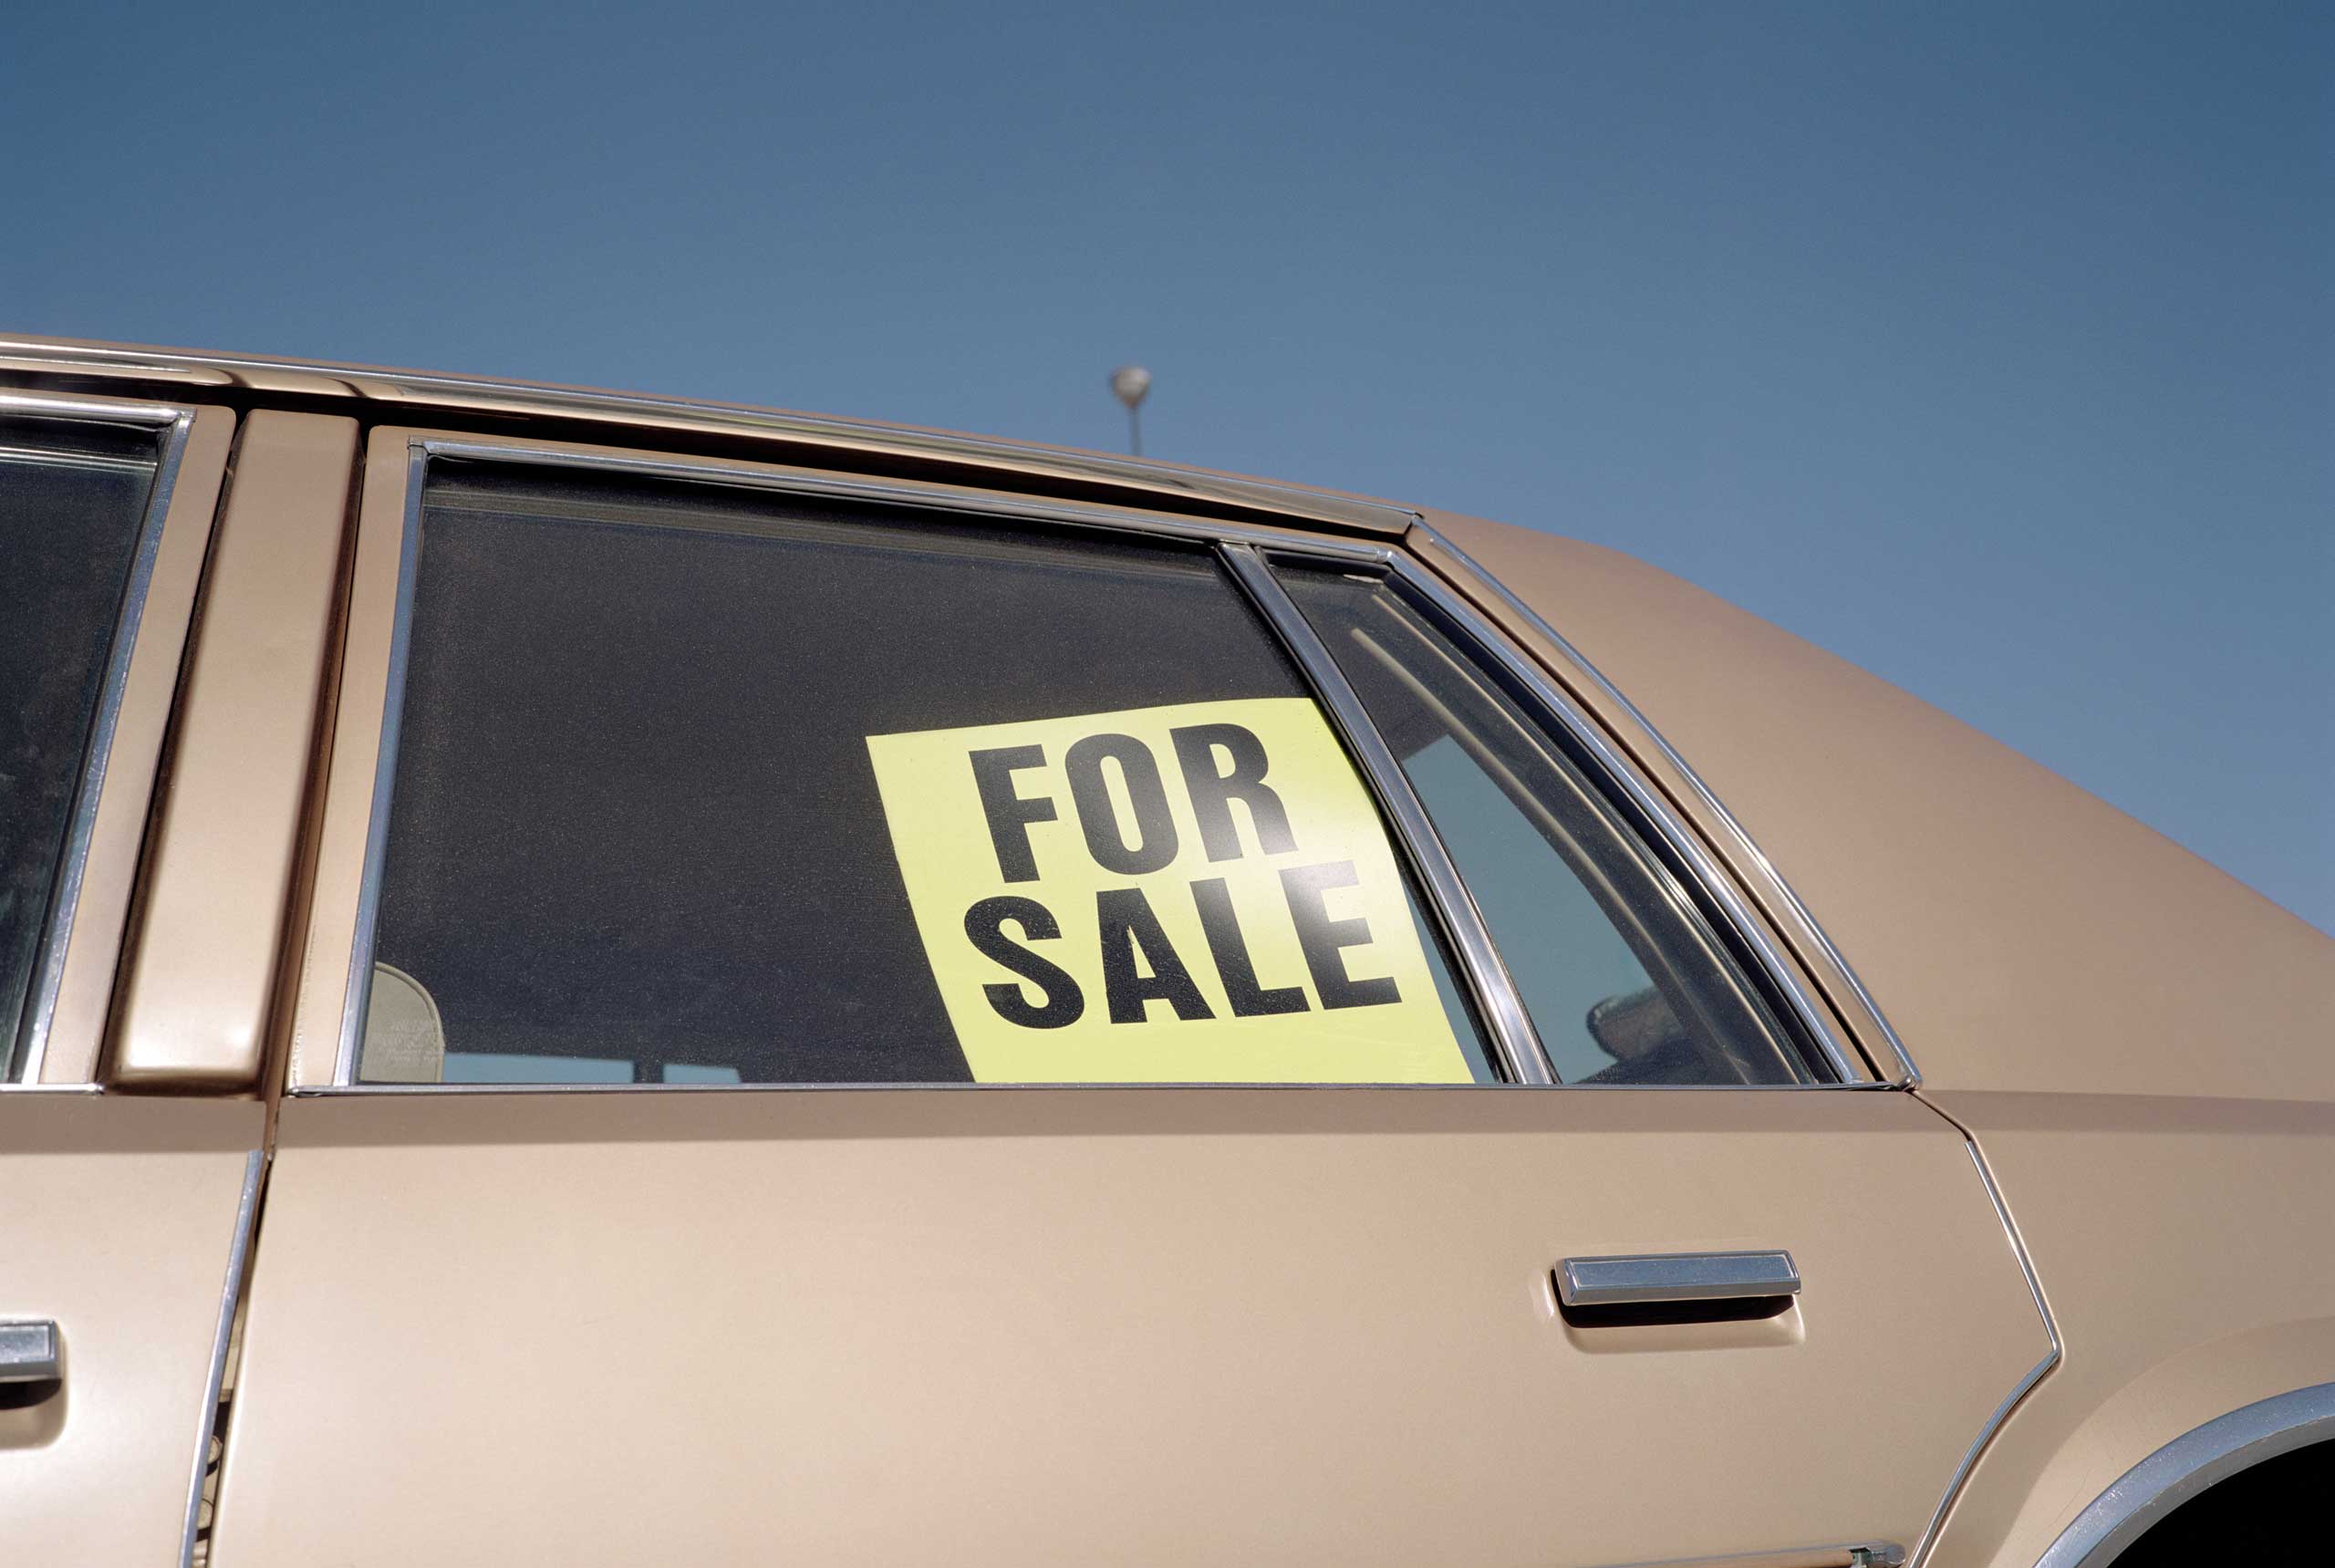 'For Sale' sign placed in car window, outdoors, close-up (Alan Powdrill — Getty Images)